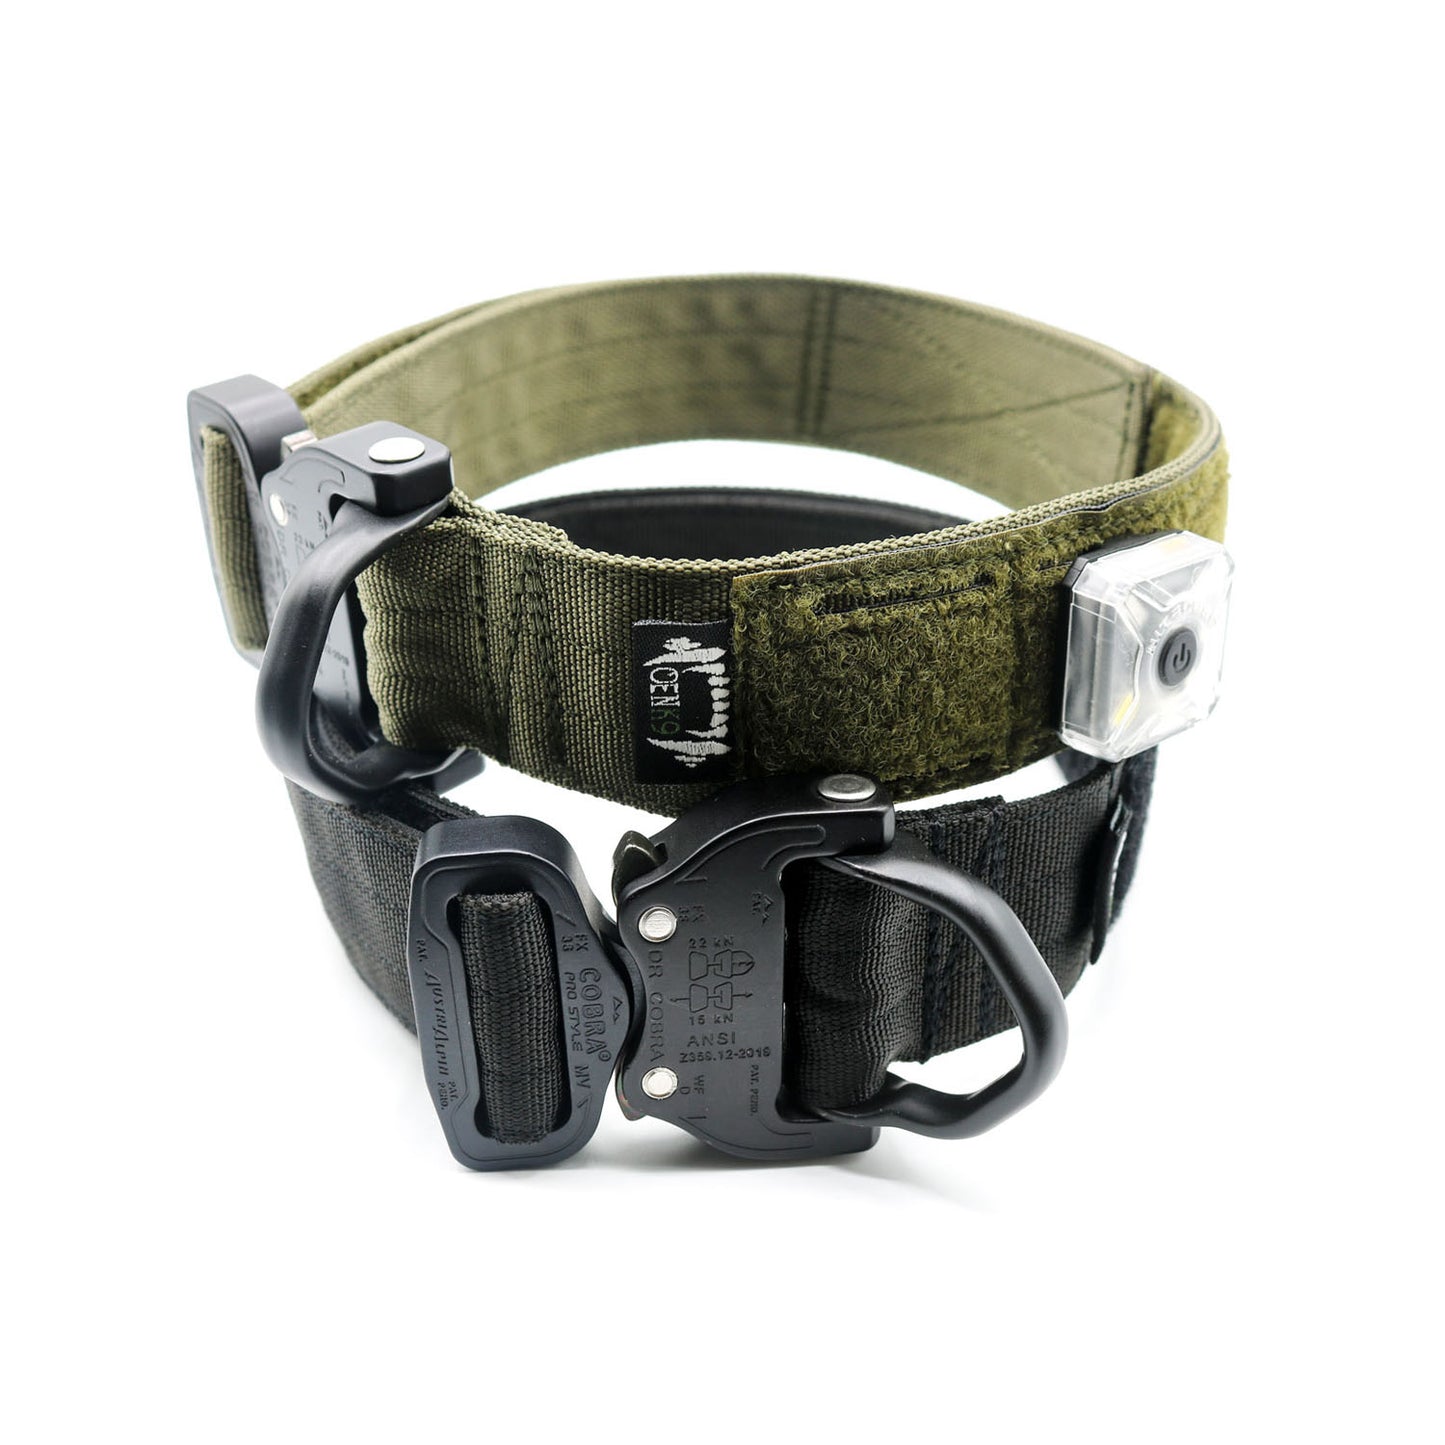 Collar MOLLE MOLLE D-ring 2.0